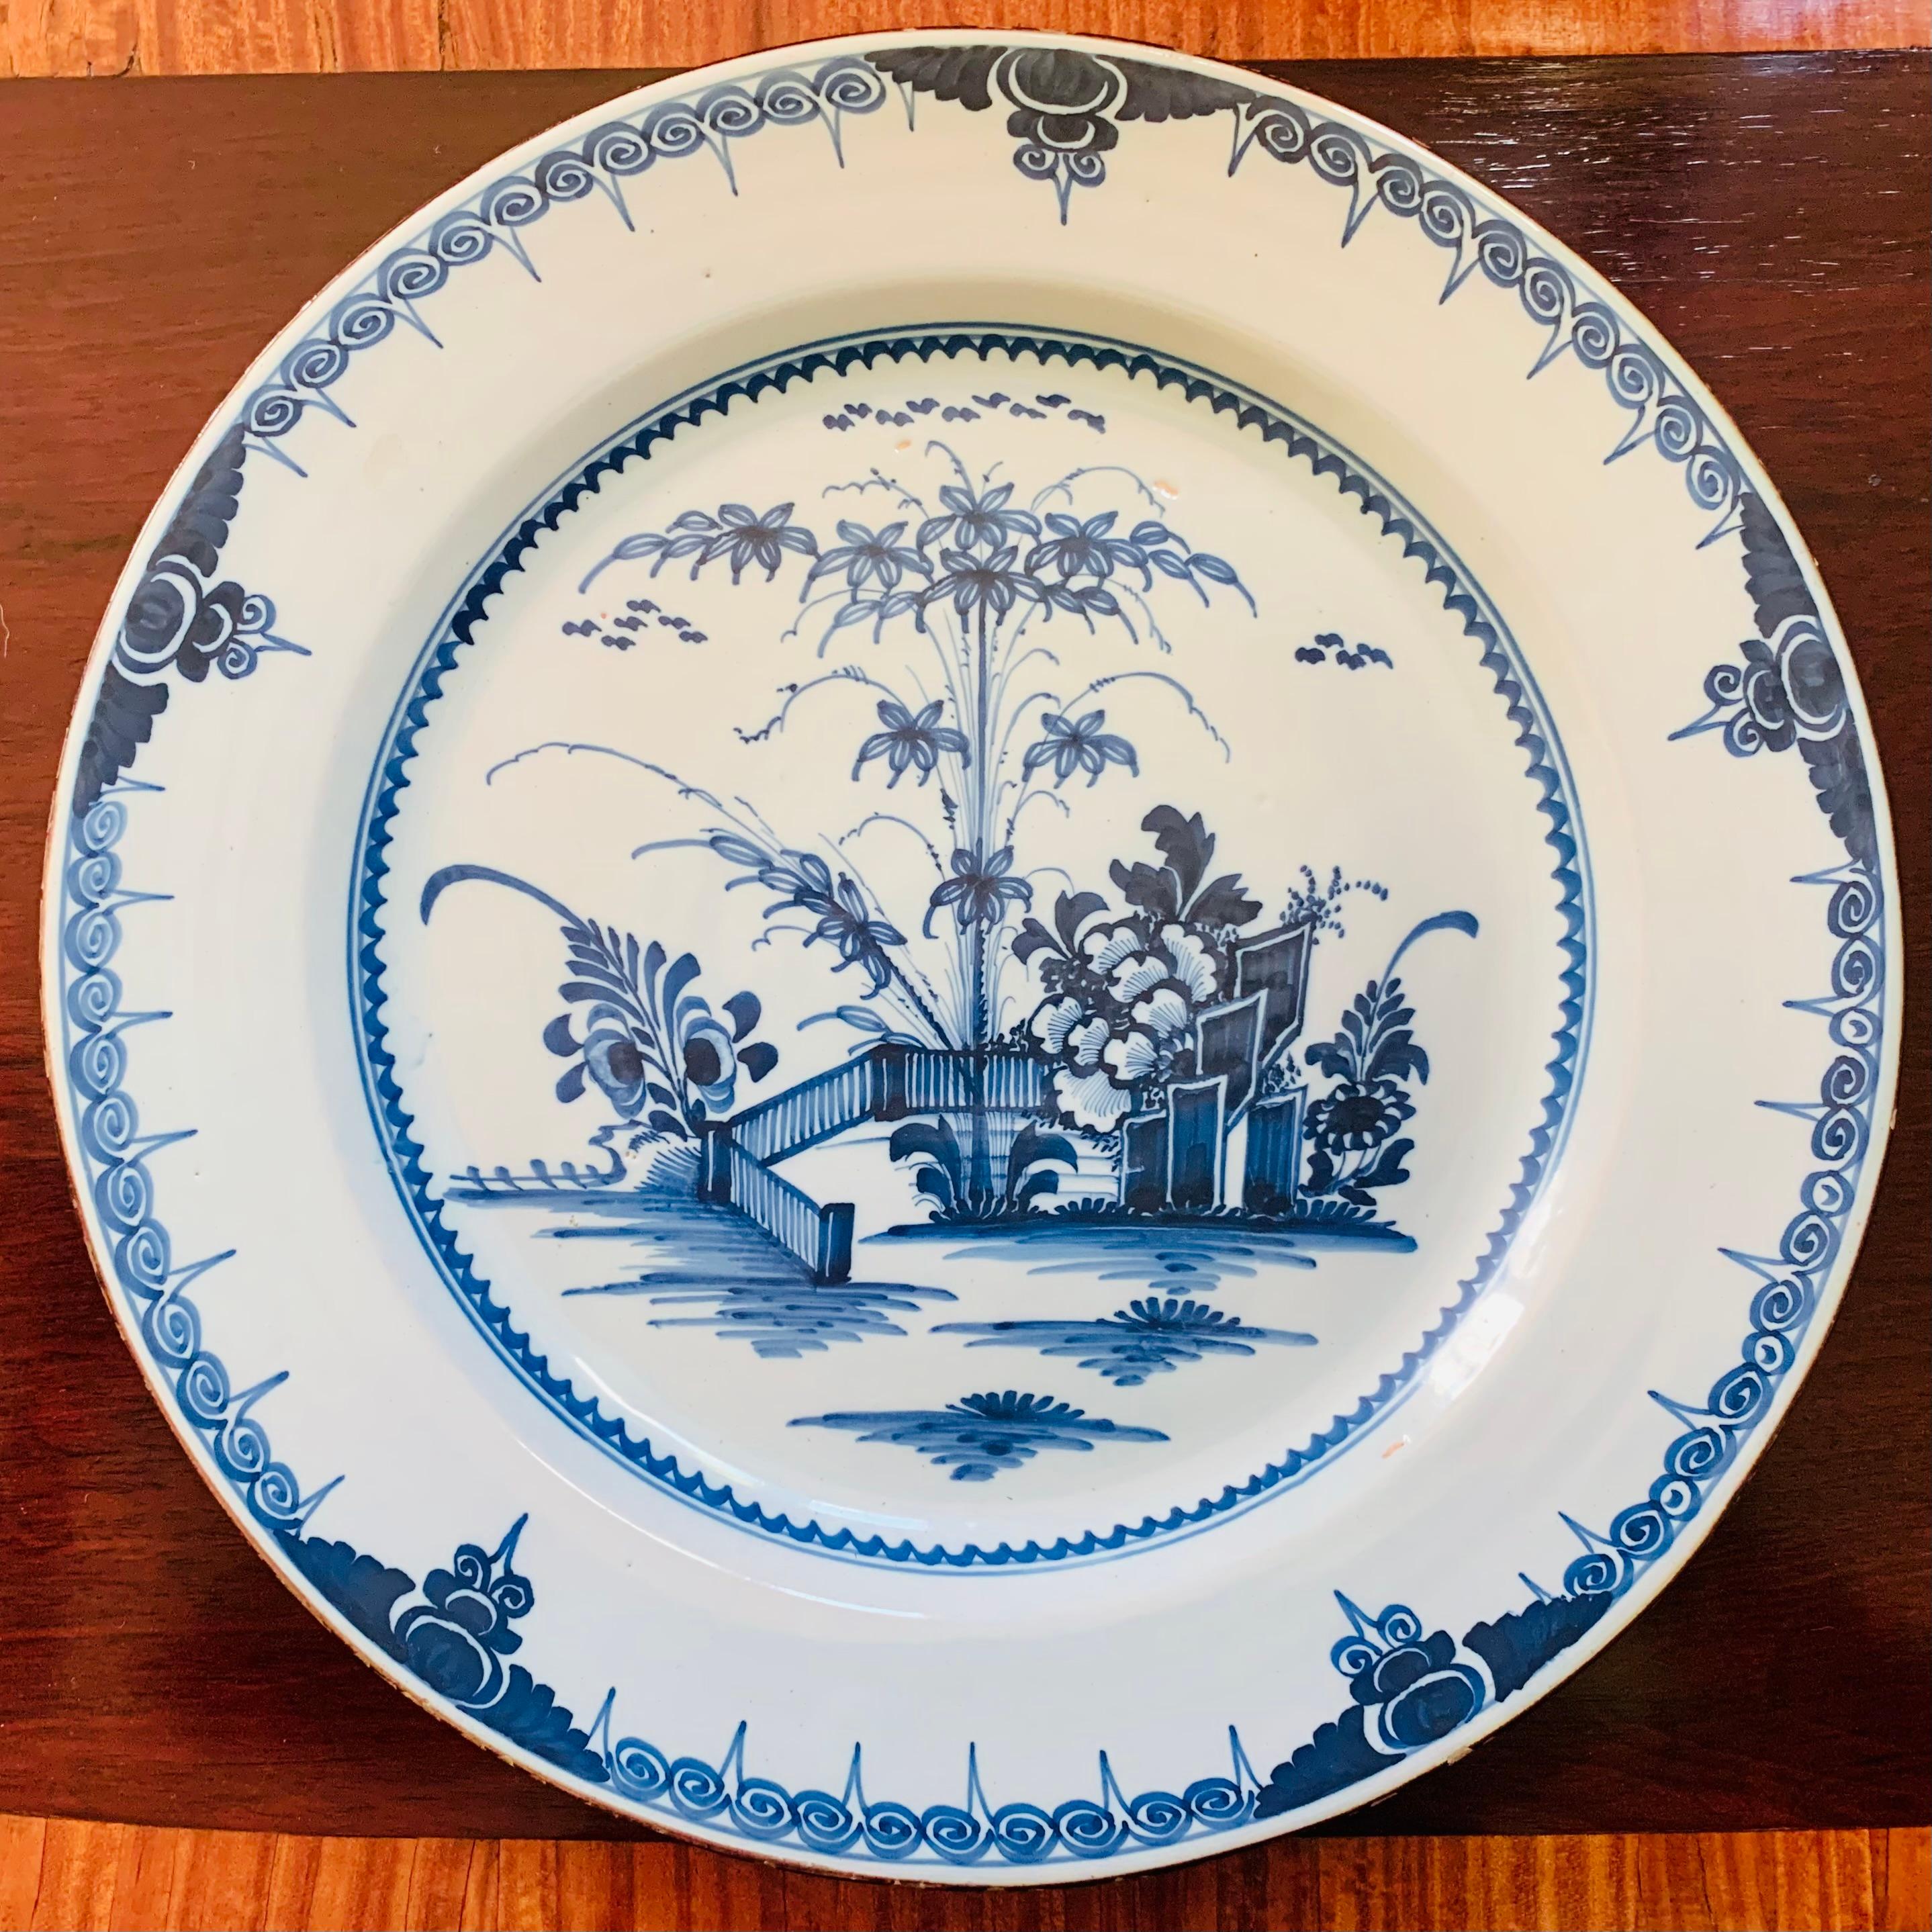 A large blue and white charger decorated with a Chinese inspired garden and fence vignette, and a repeating scroll pattern border with a brown glazed rim. An identical example is in the collection of the Victoria and Albert Museum, attributed to